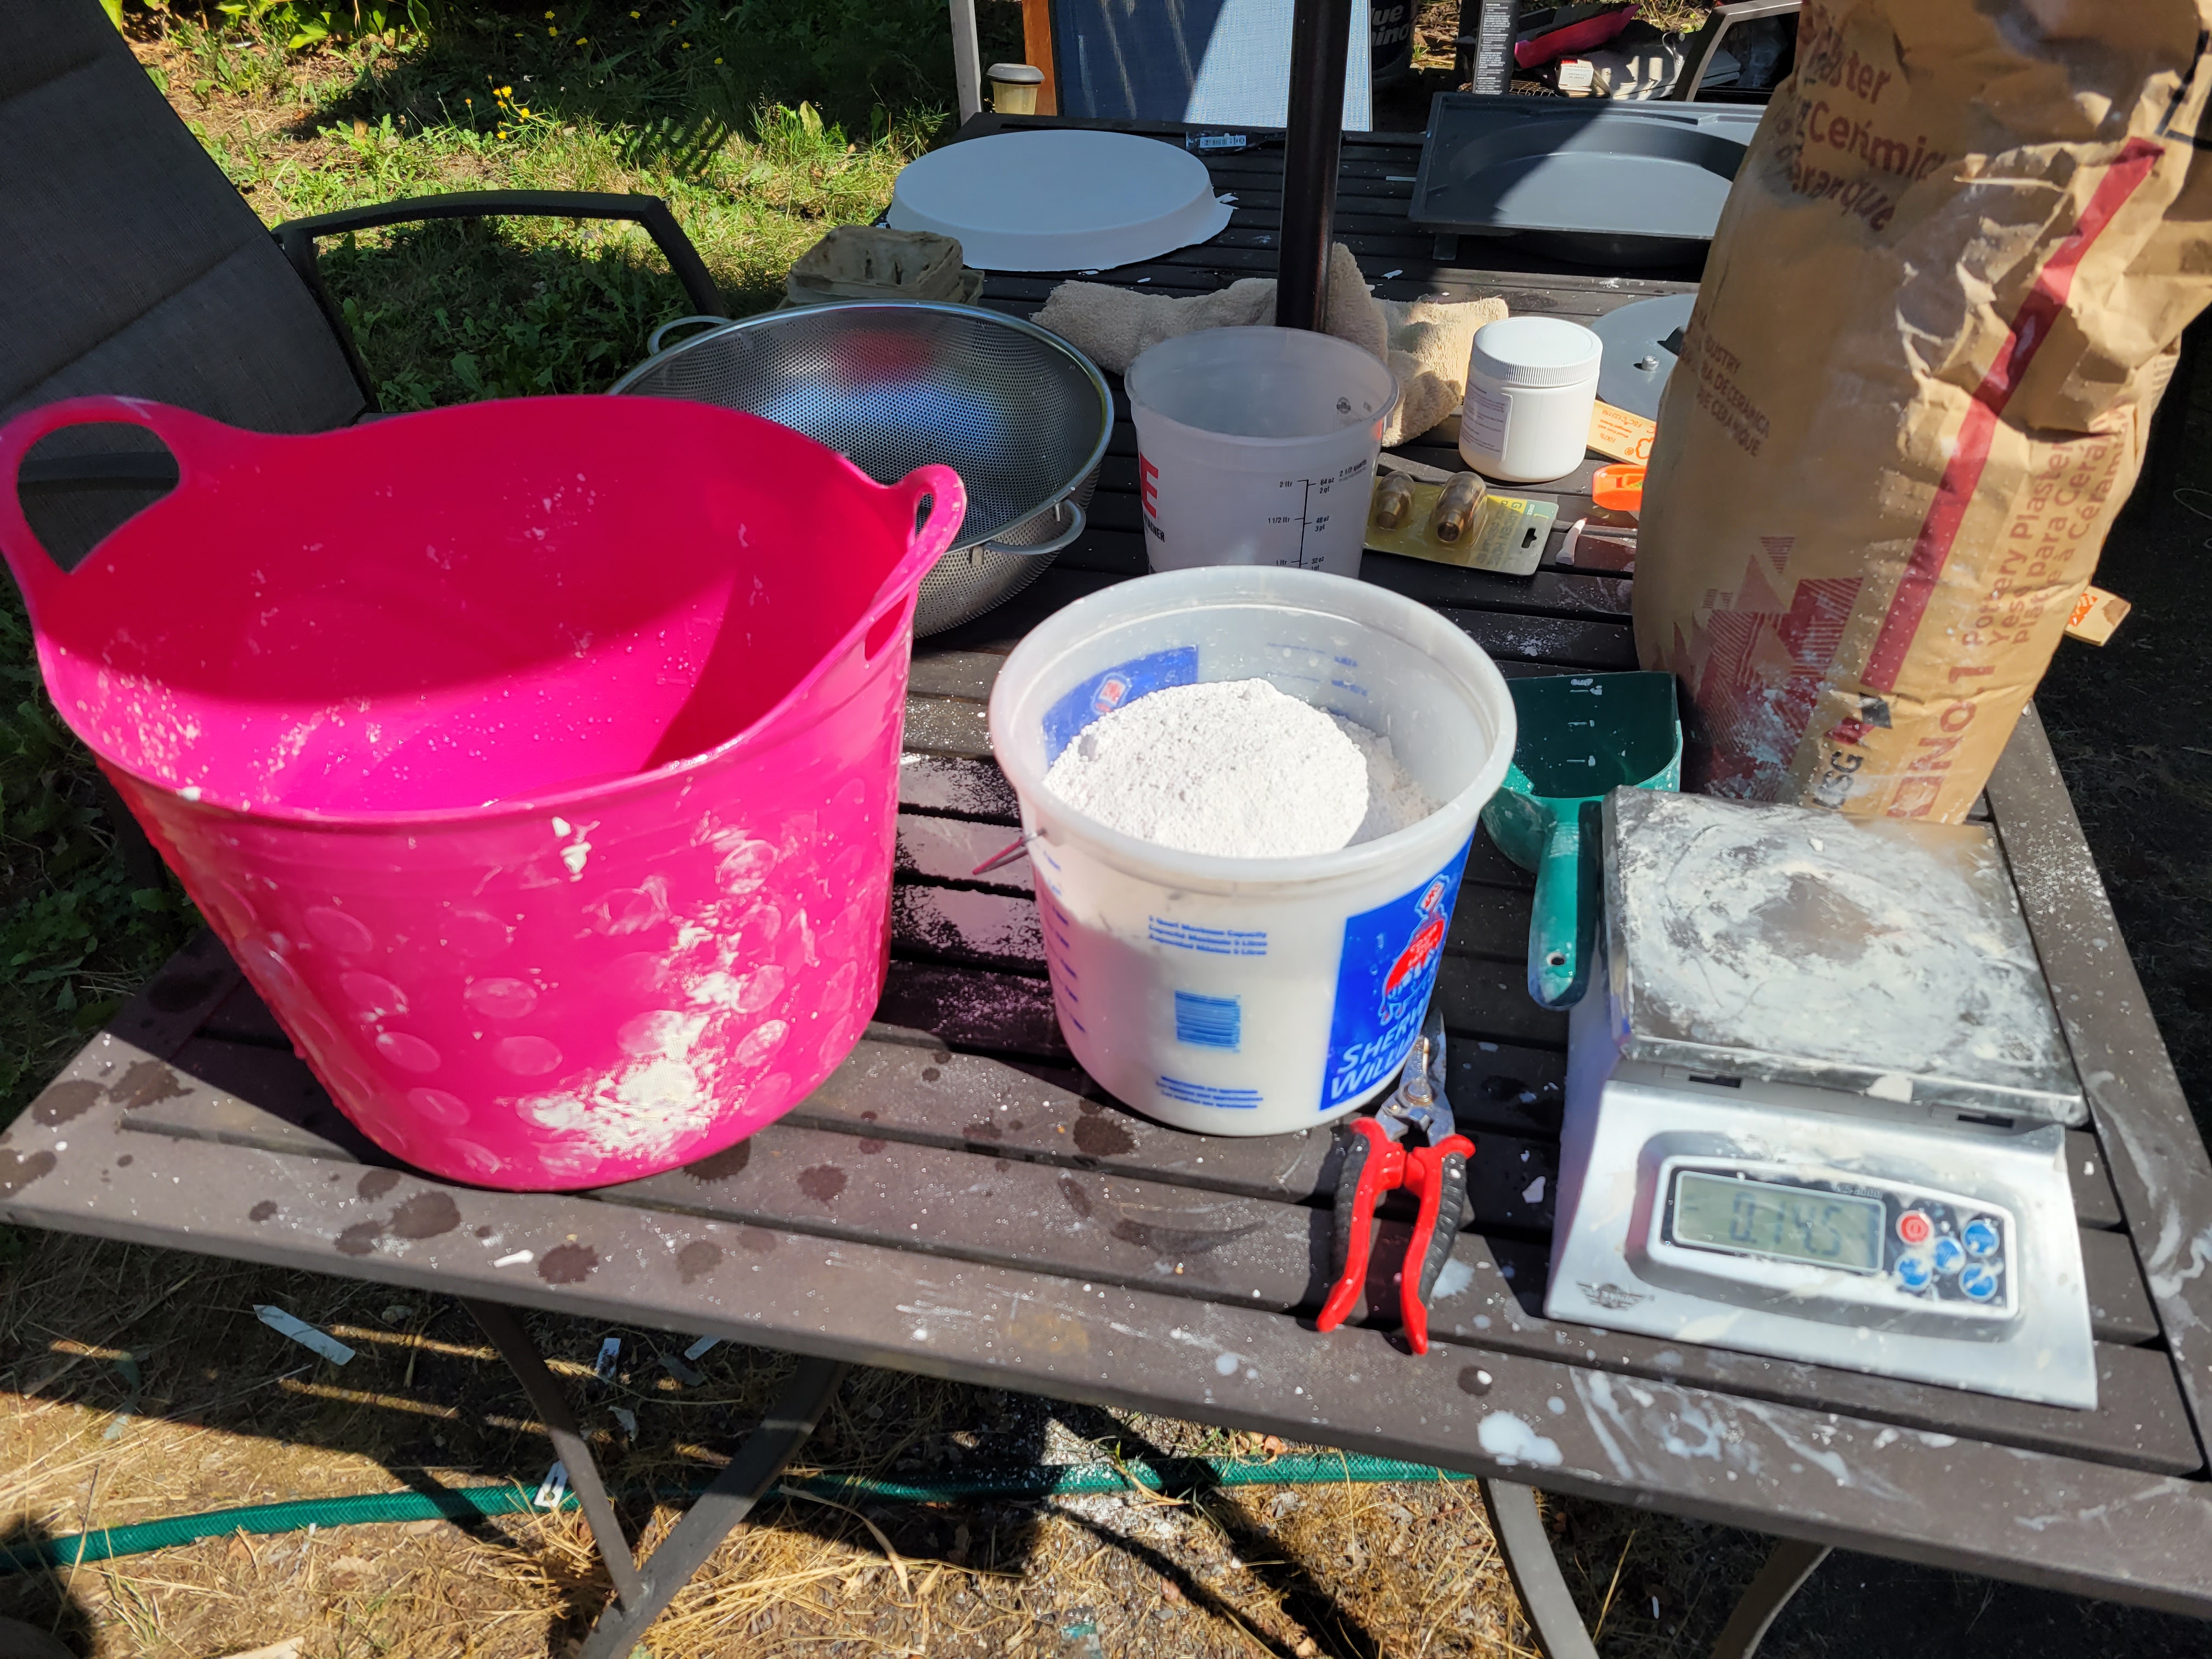 incomplete set of equipment for making plaster bats, including flexible feed bucket, plastic measuring bucket full of powdered plaster, large bag of usg#1 plaster, plastic scoop, and digital scale